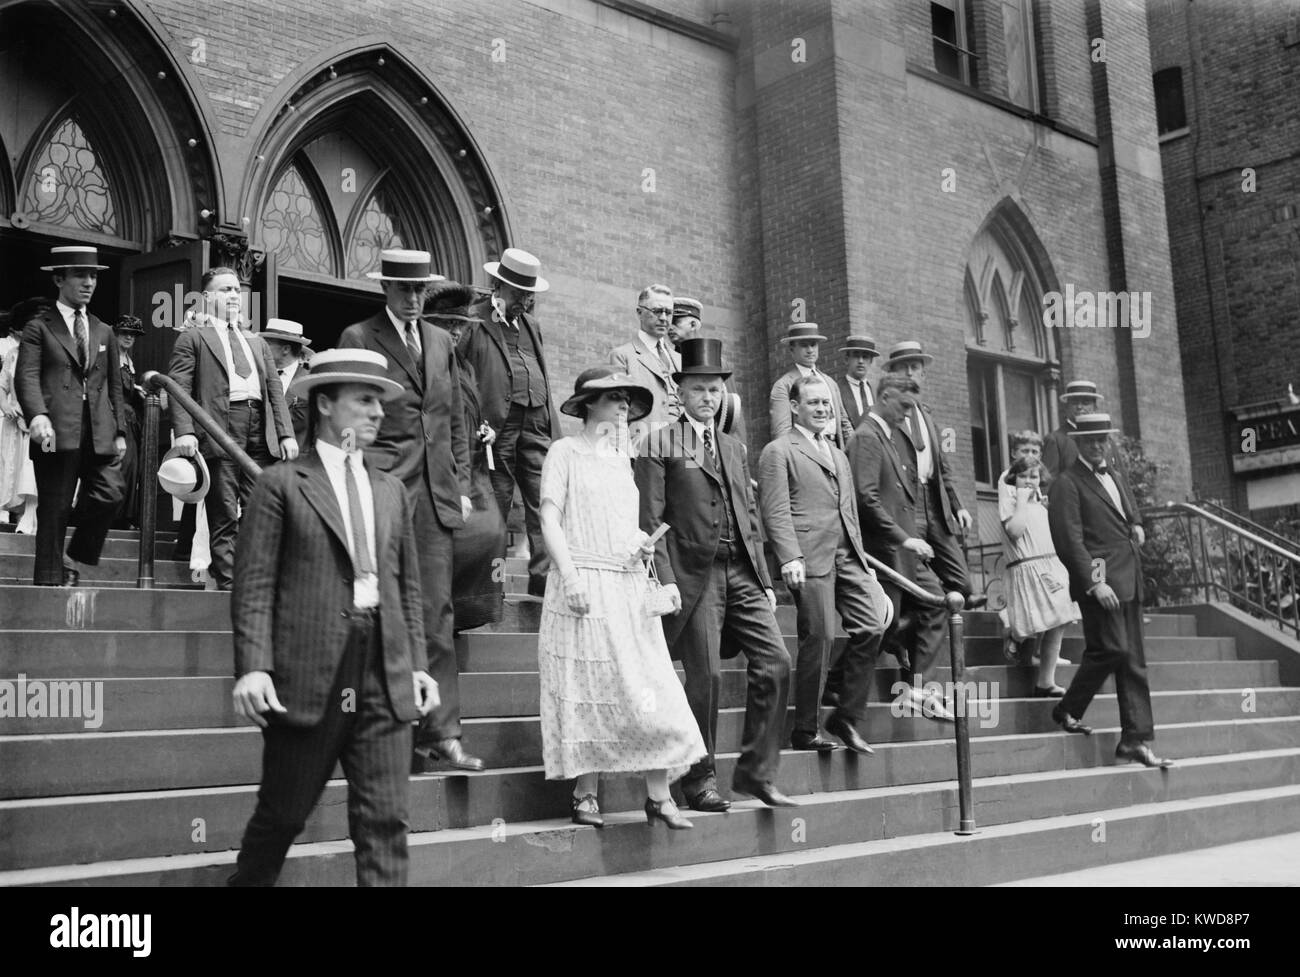 President Calvin Coolidge and First Lady Grace Coolidge leaving church on Aug. 5, 1923. It was the first Sunday after the death of President Warren Harding three days earlier. (BSLOC_2015_16_17) Stock Photo